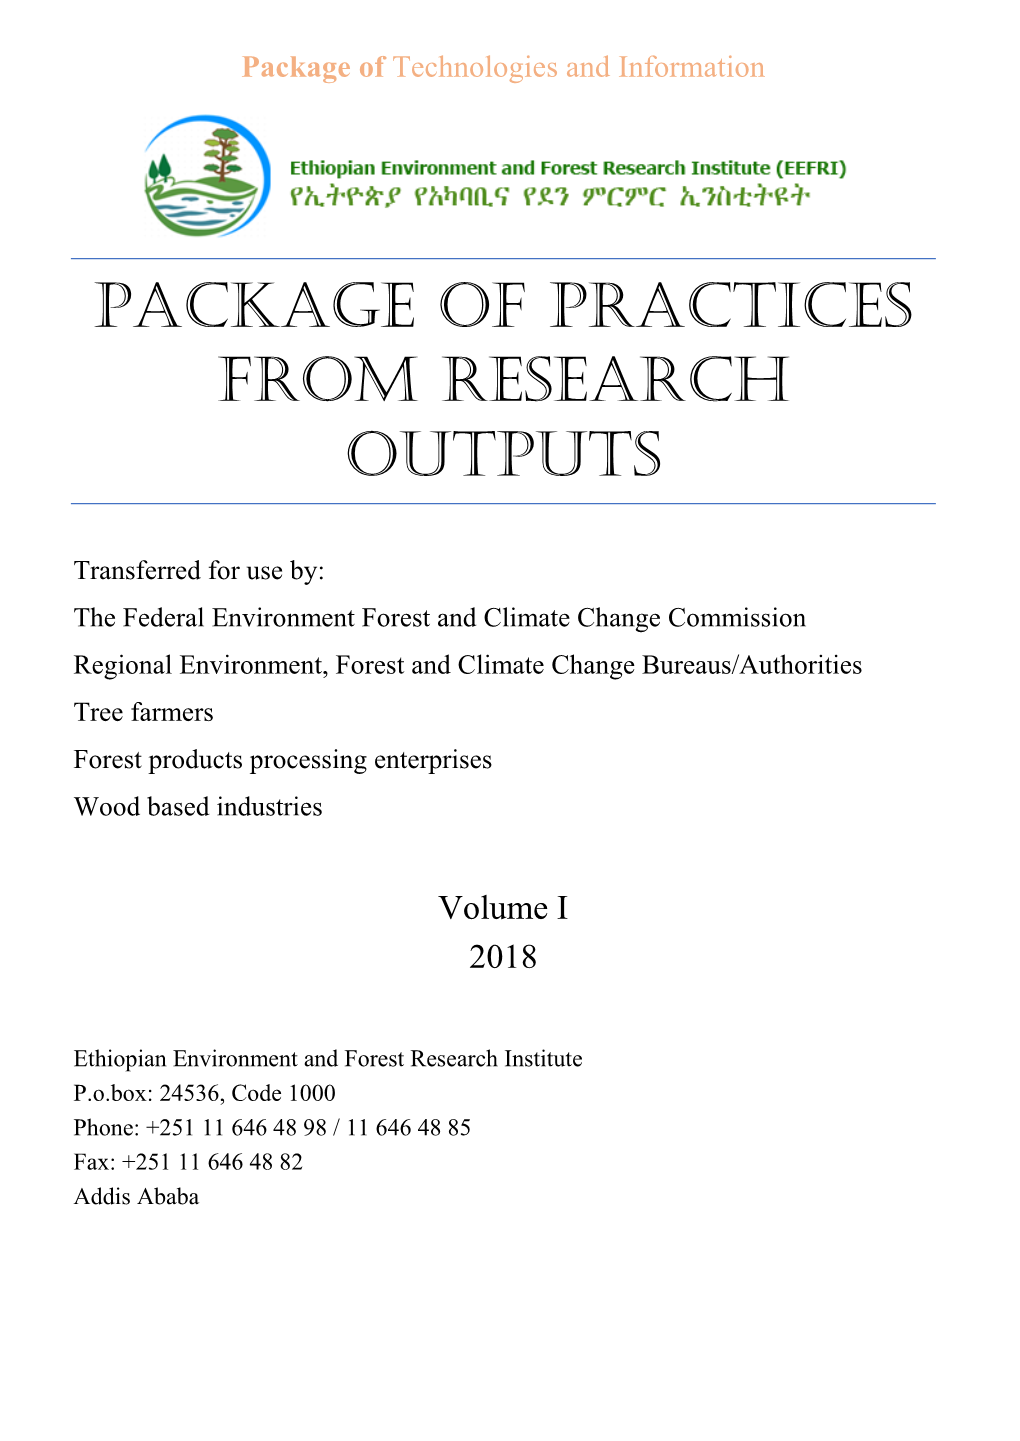 Package of Practices from Research Outputs